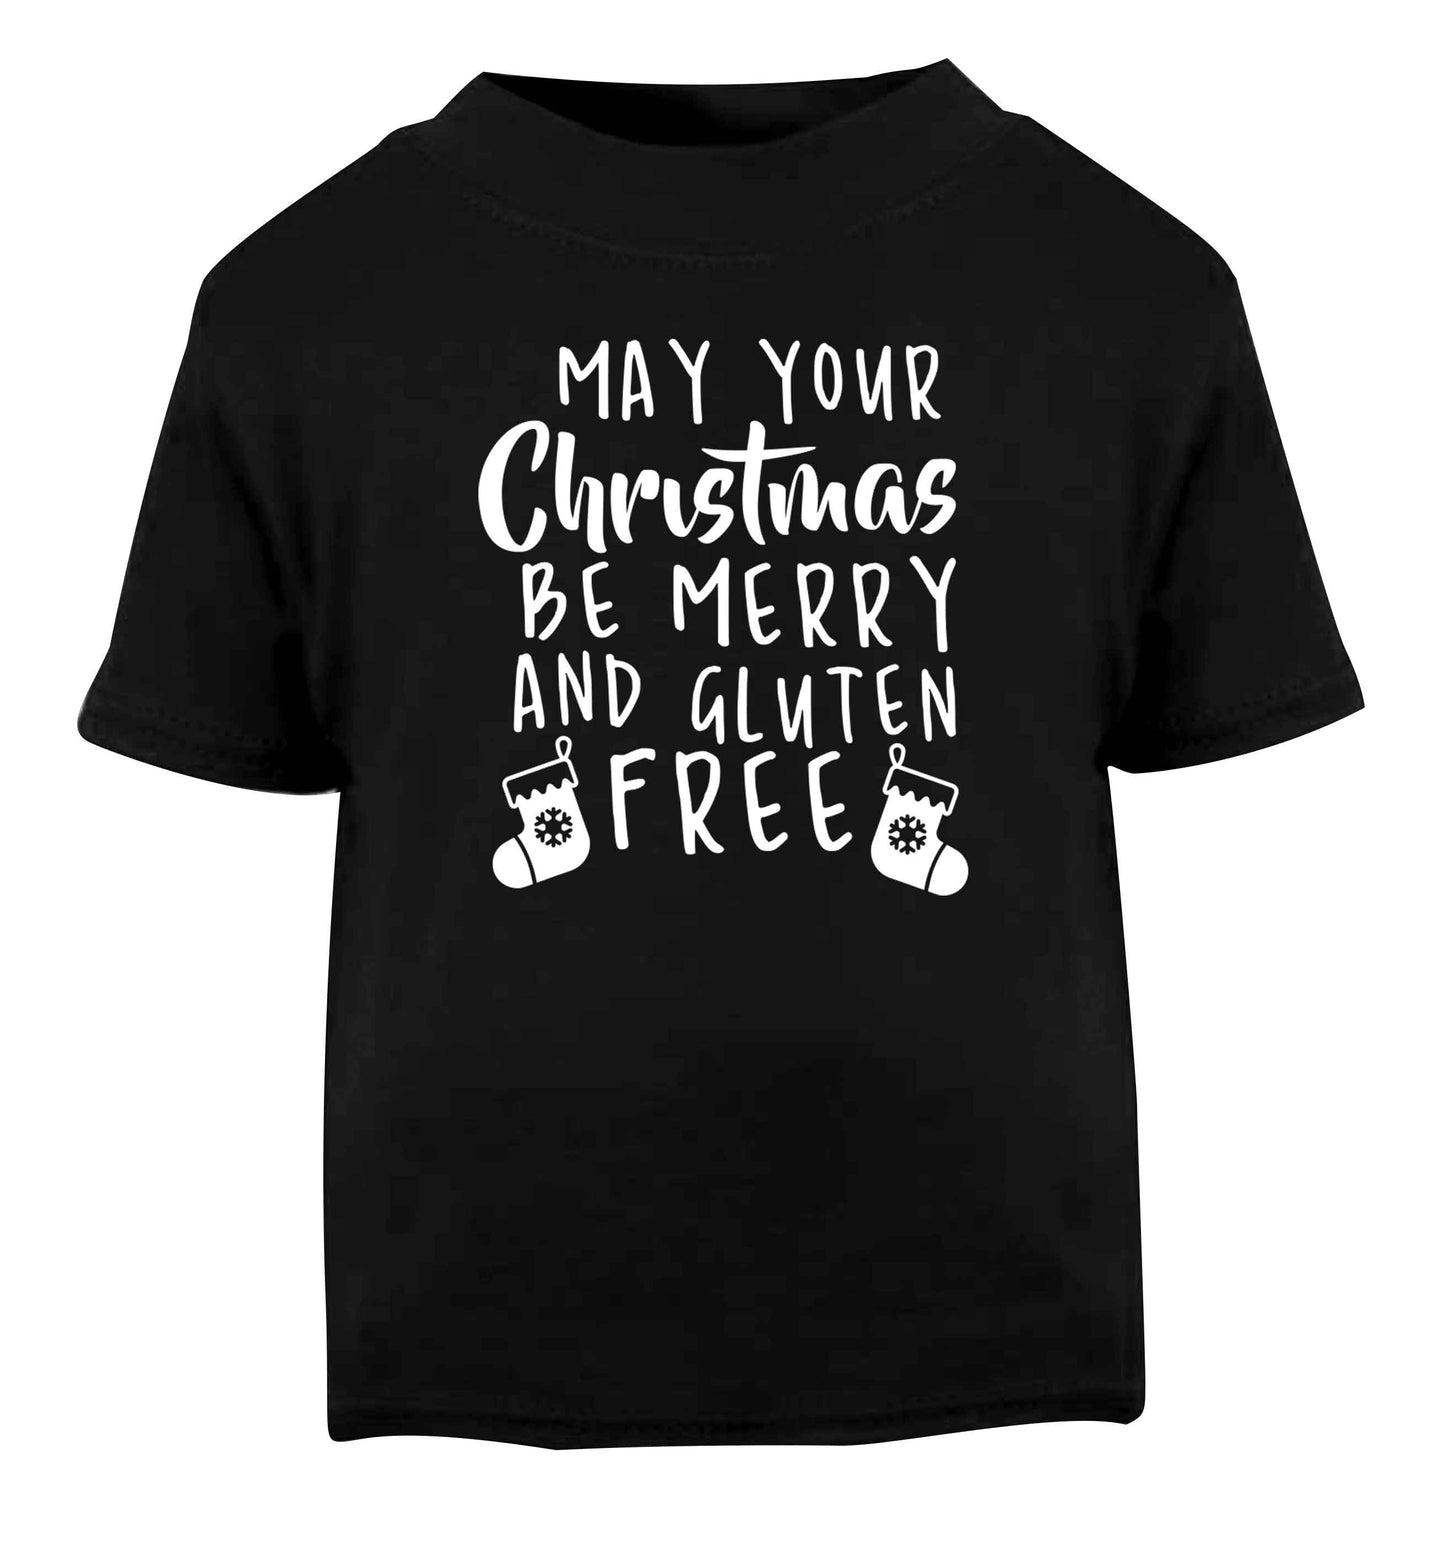 May your Christmas be merry and gluten free Black Baby Toddler Tshirt 2 years